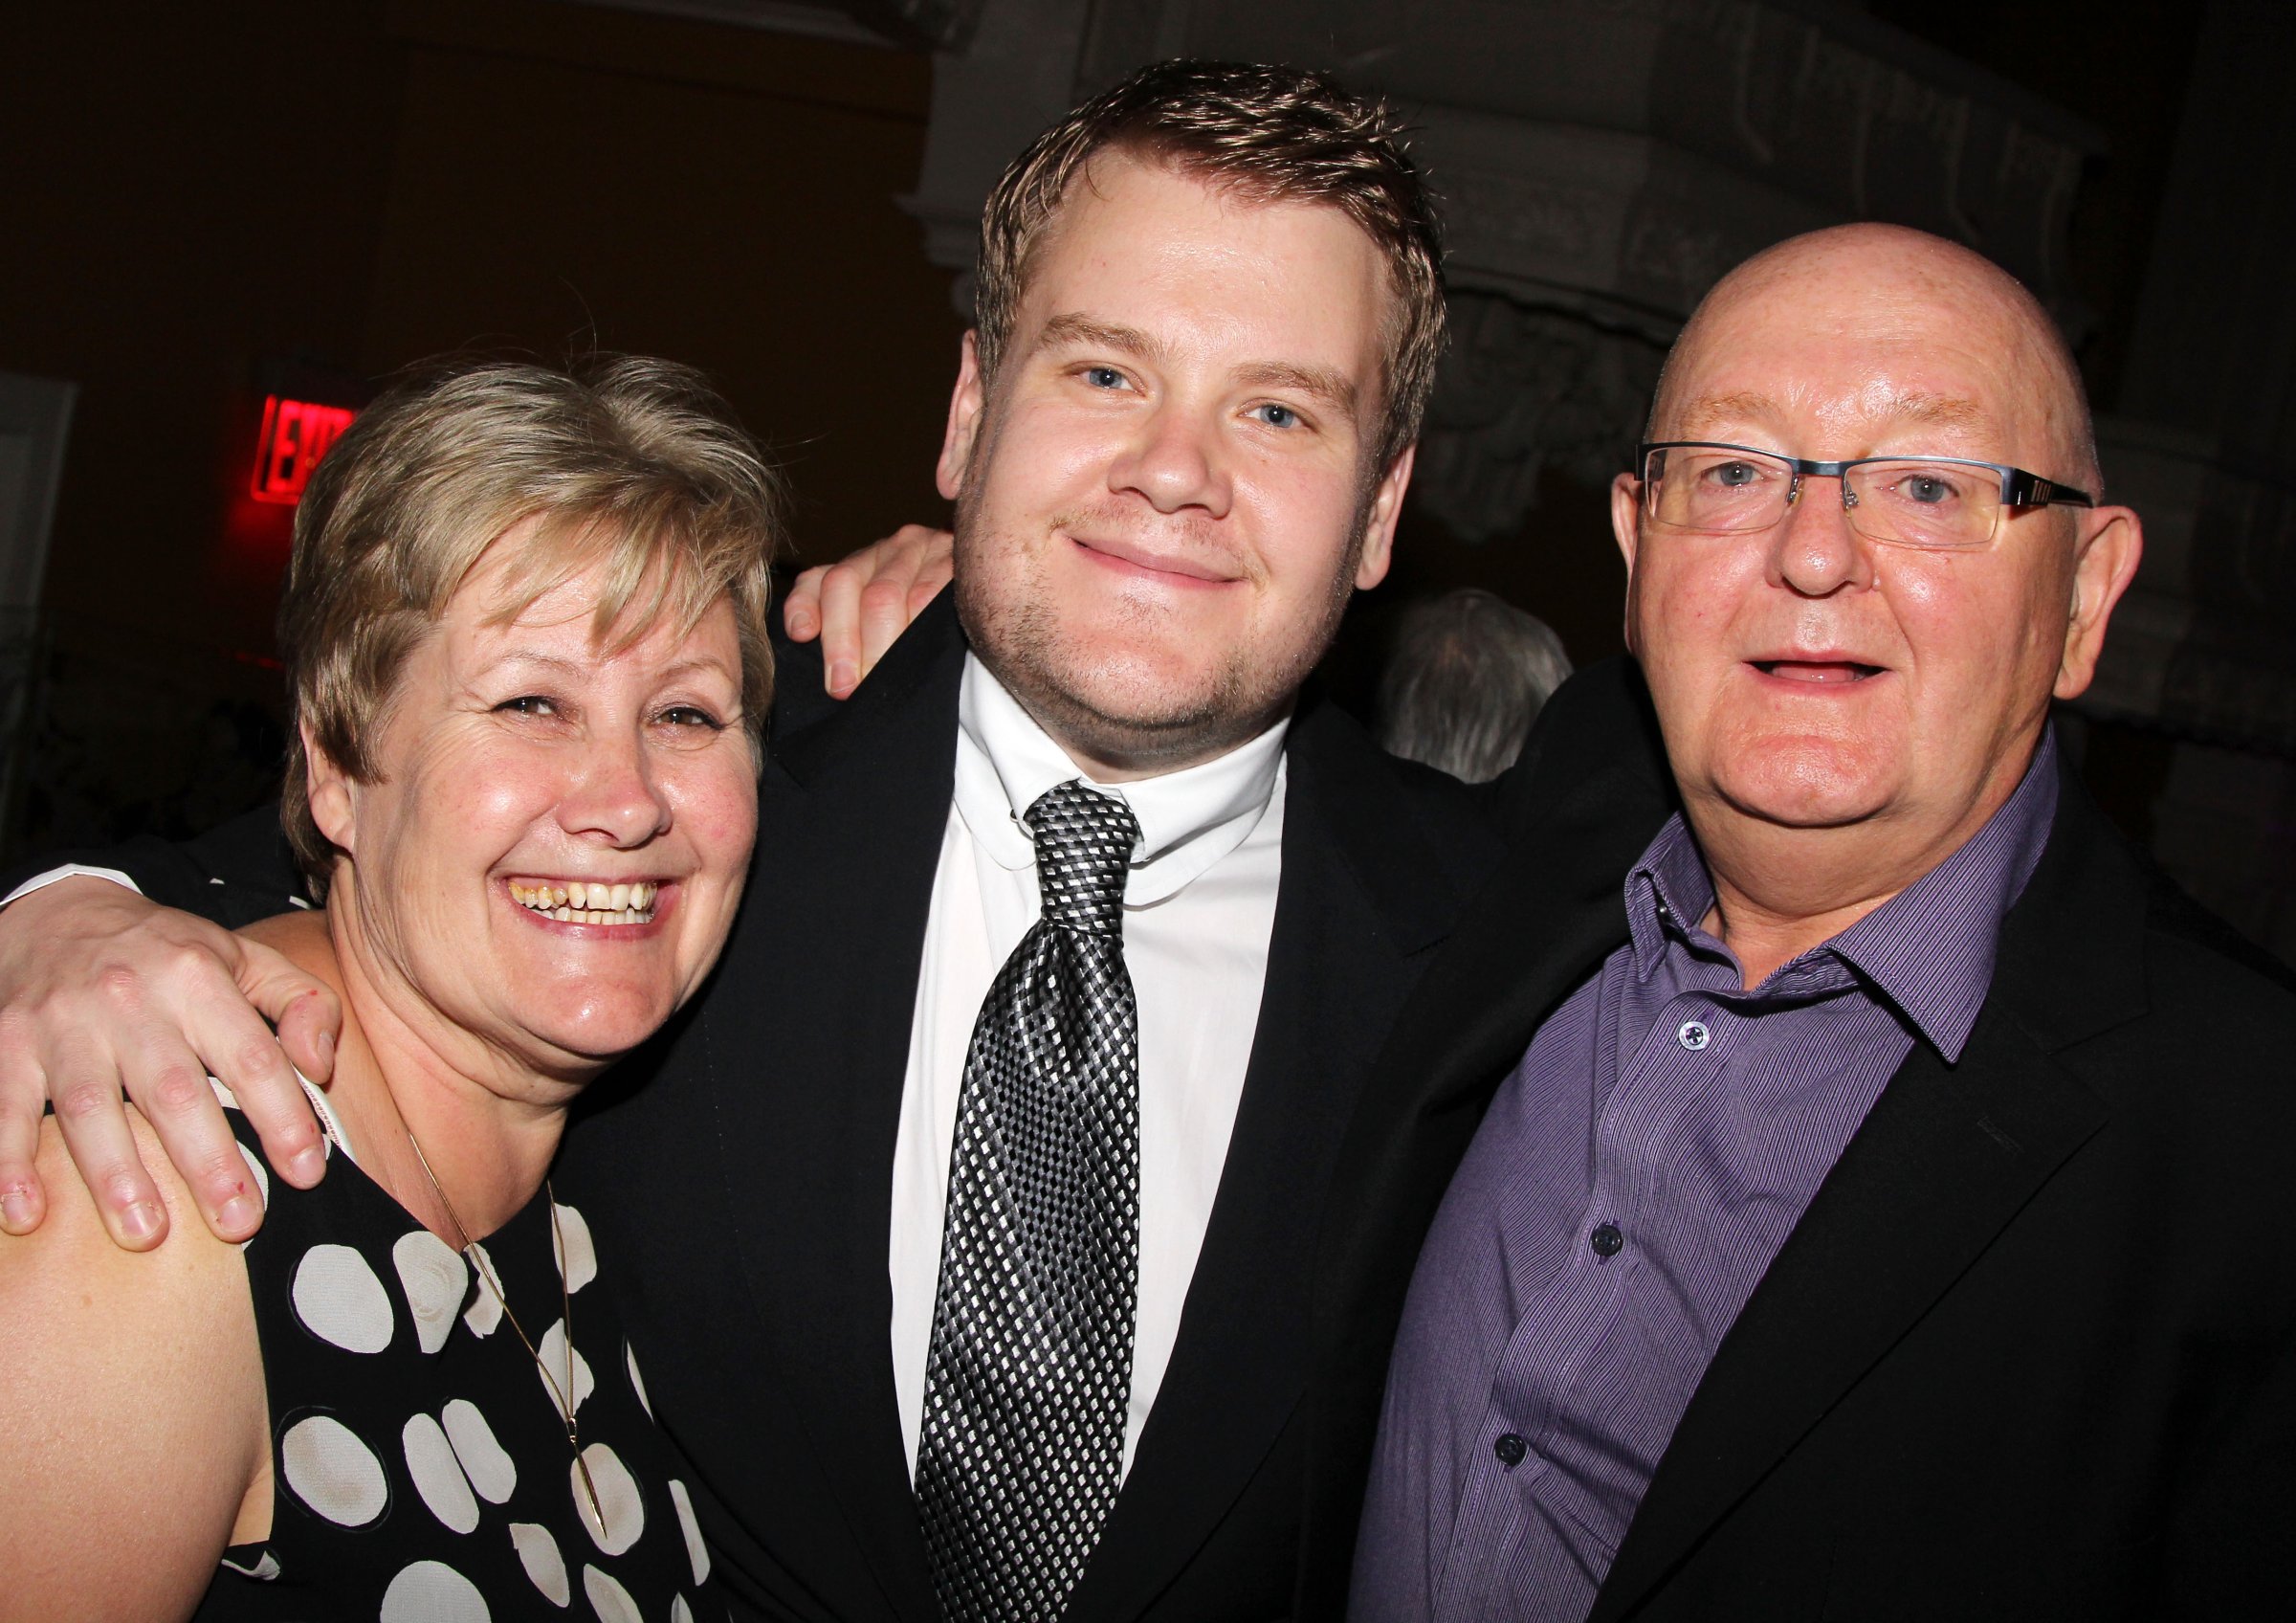 James Corden poses with his mother Margaret Corden and father Malcolm Corden as they attend the after party for the "One Man, Two Guvnors" Broadway Opening Night at The Liberty Theatre on April 18, 2012 in New York City.